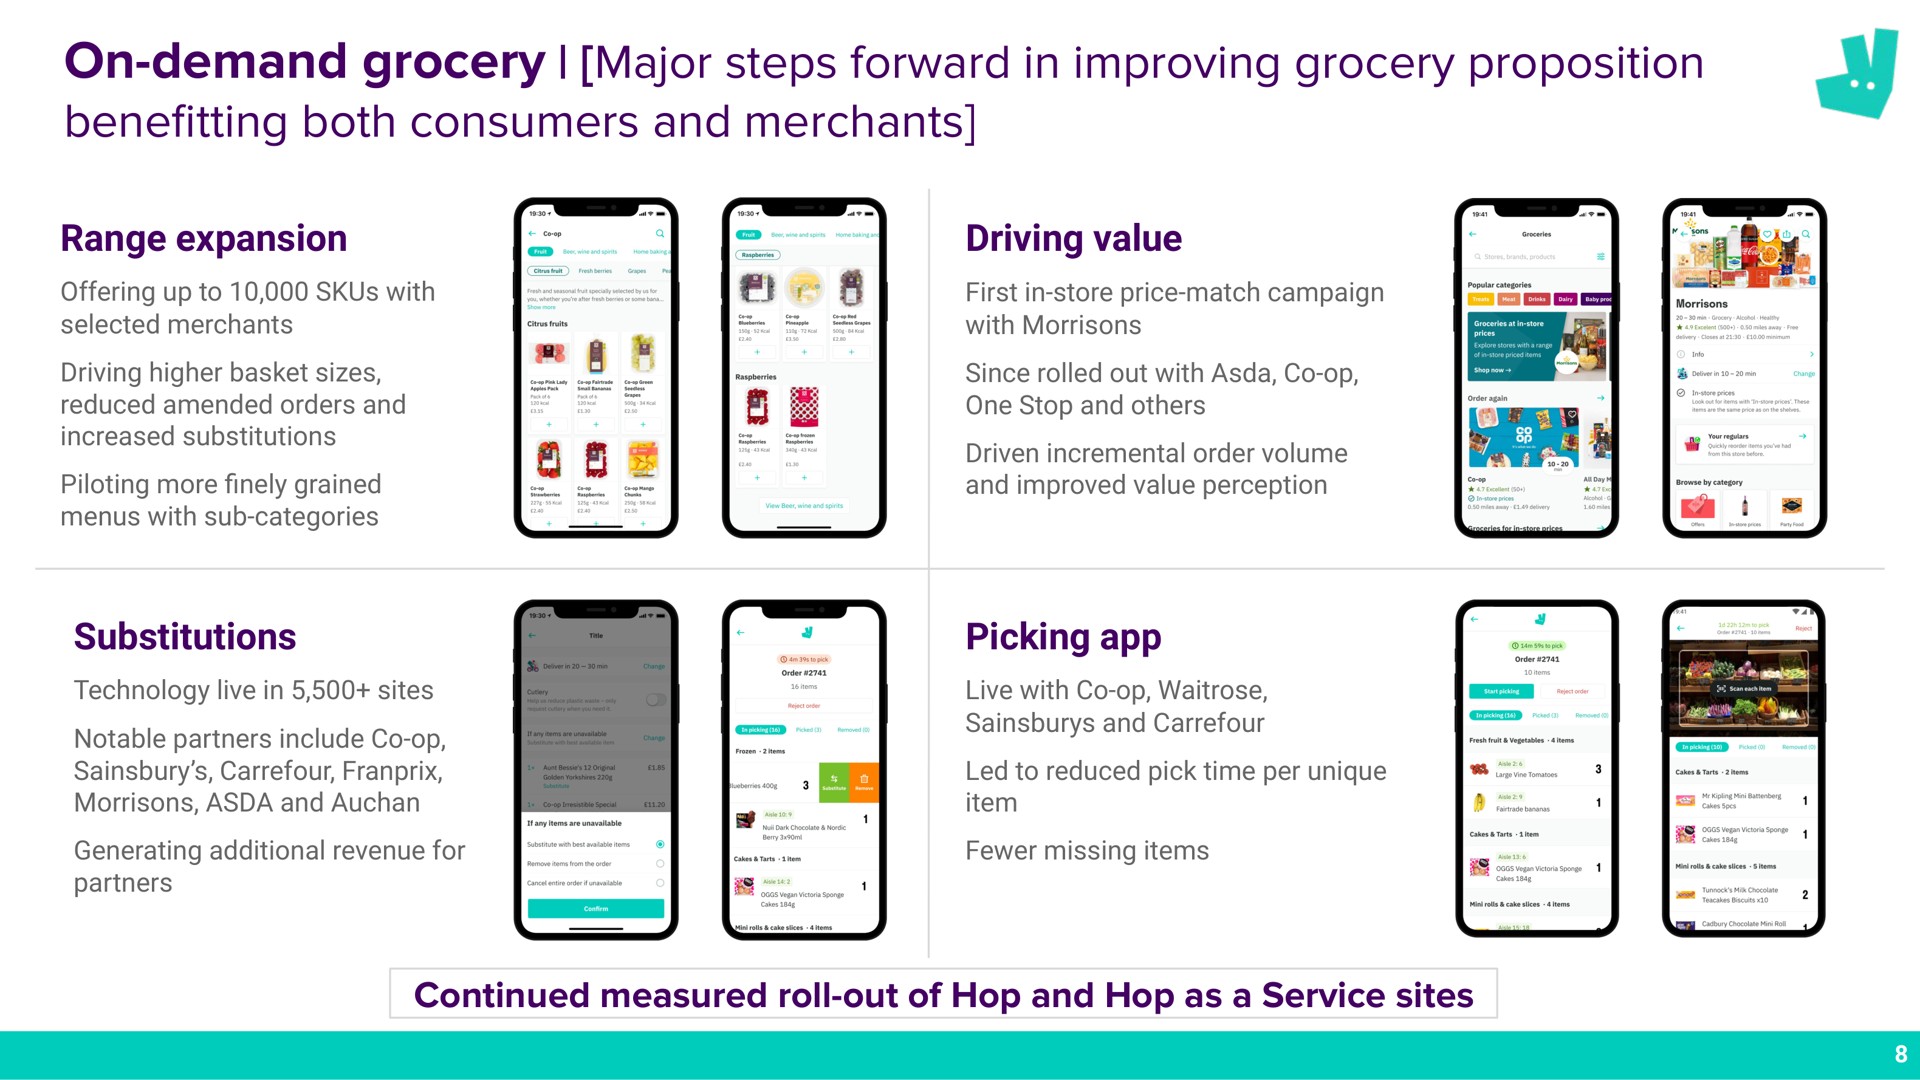 on demand grocery major steps forward in improving grocery proposition bene both consumers and merchants benefitting a | Deliveroo